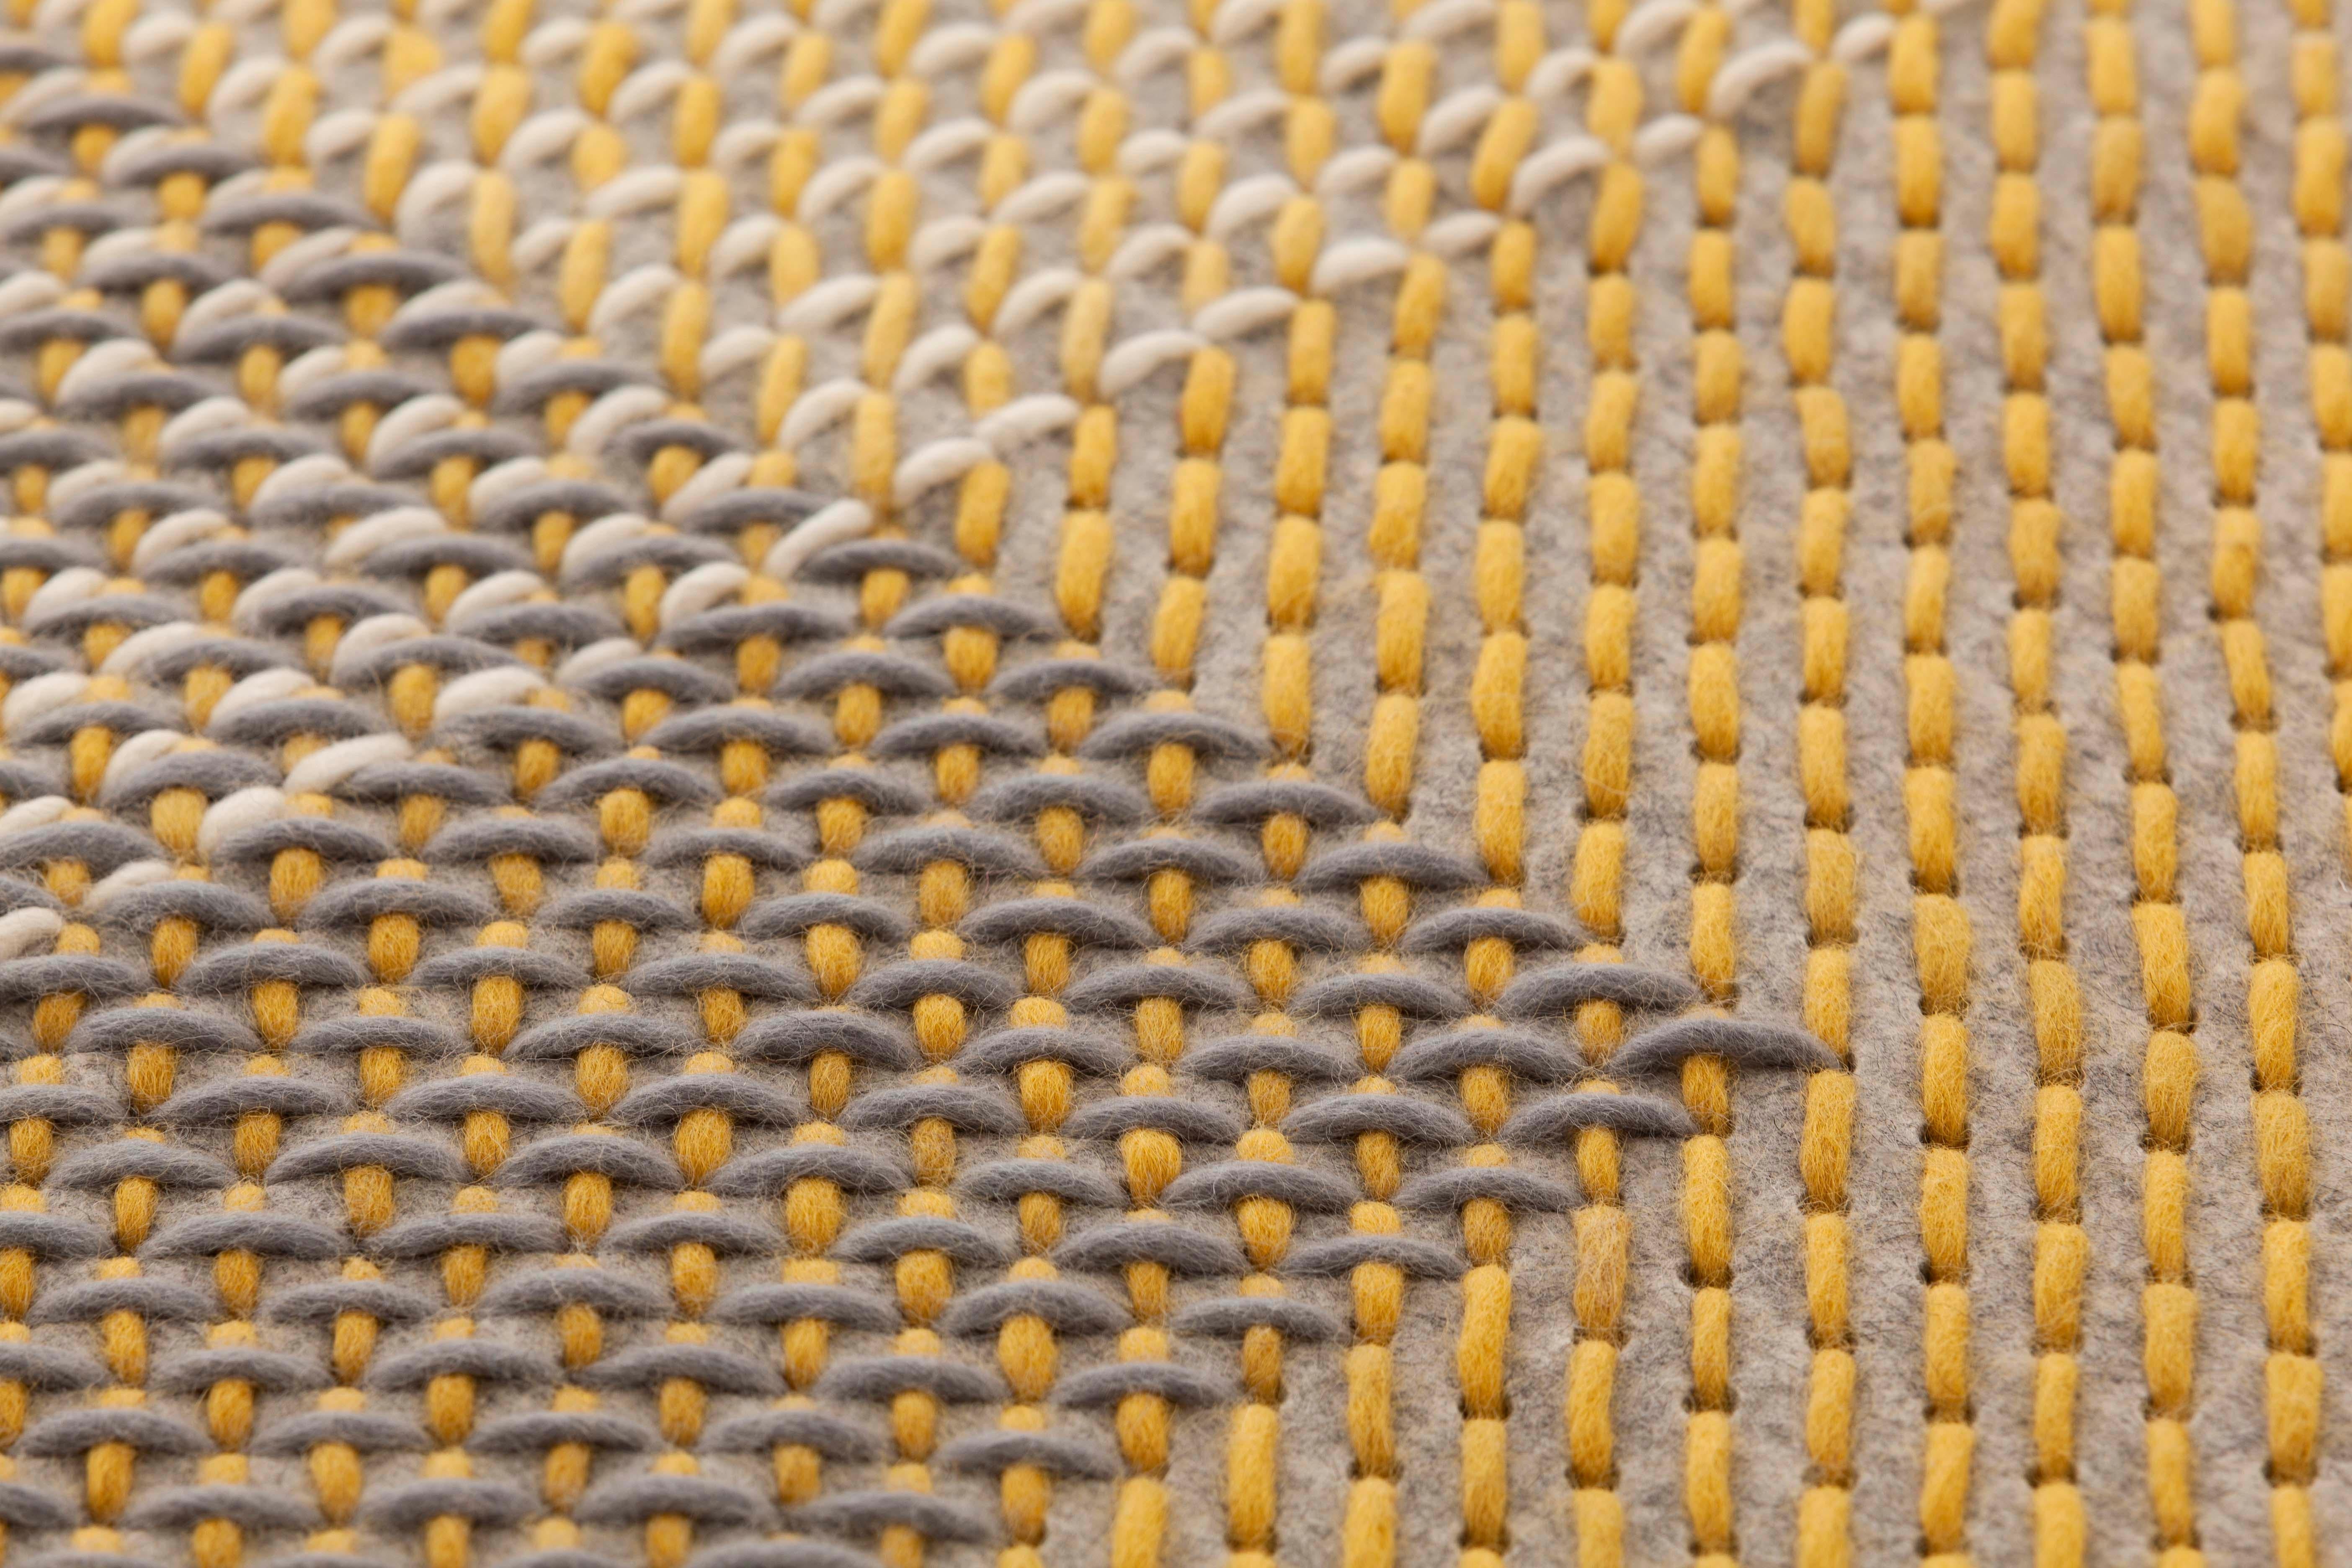 A completely different application of the possibilities offered by the technique devised by Charlotte Lancelot for the Canevas collection. Using the same cross stitch technique produced with coloured wool threads on a perforated felt base, Canevas